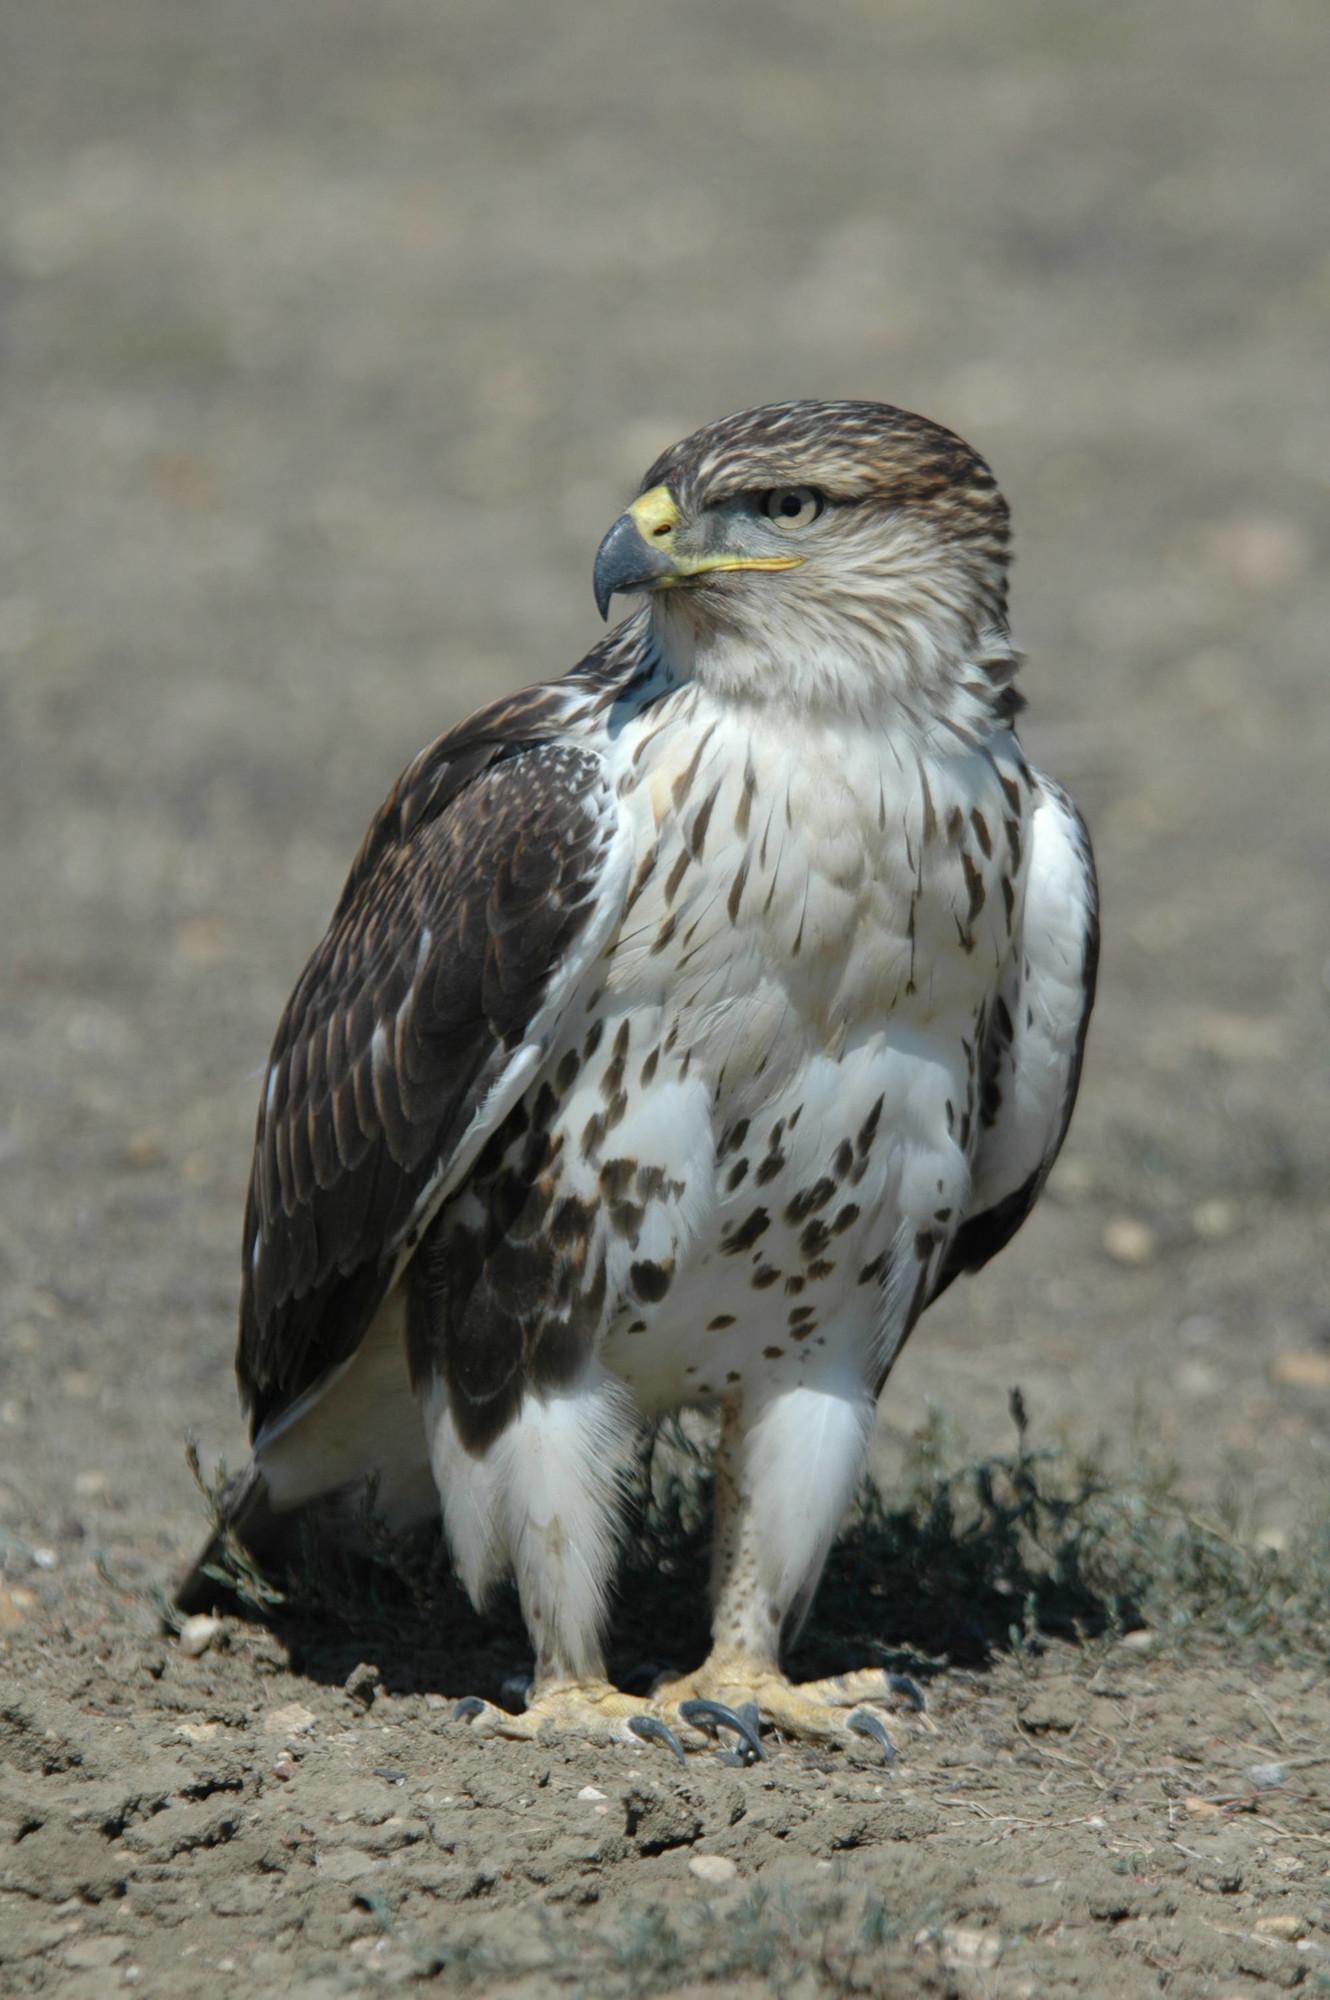 A ferruginous hawk stands on the ground